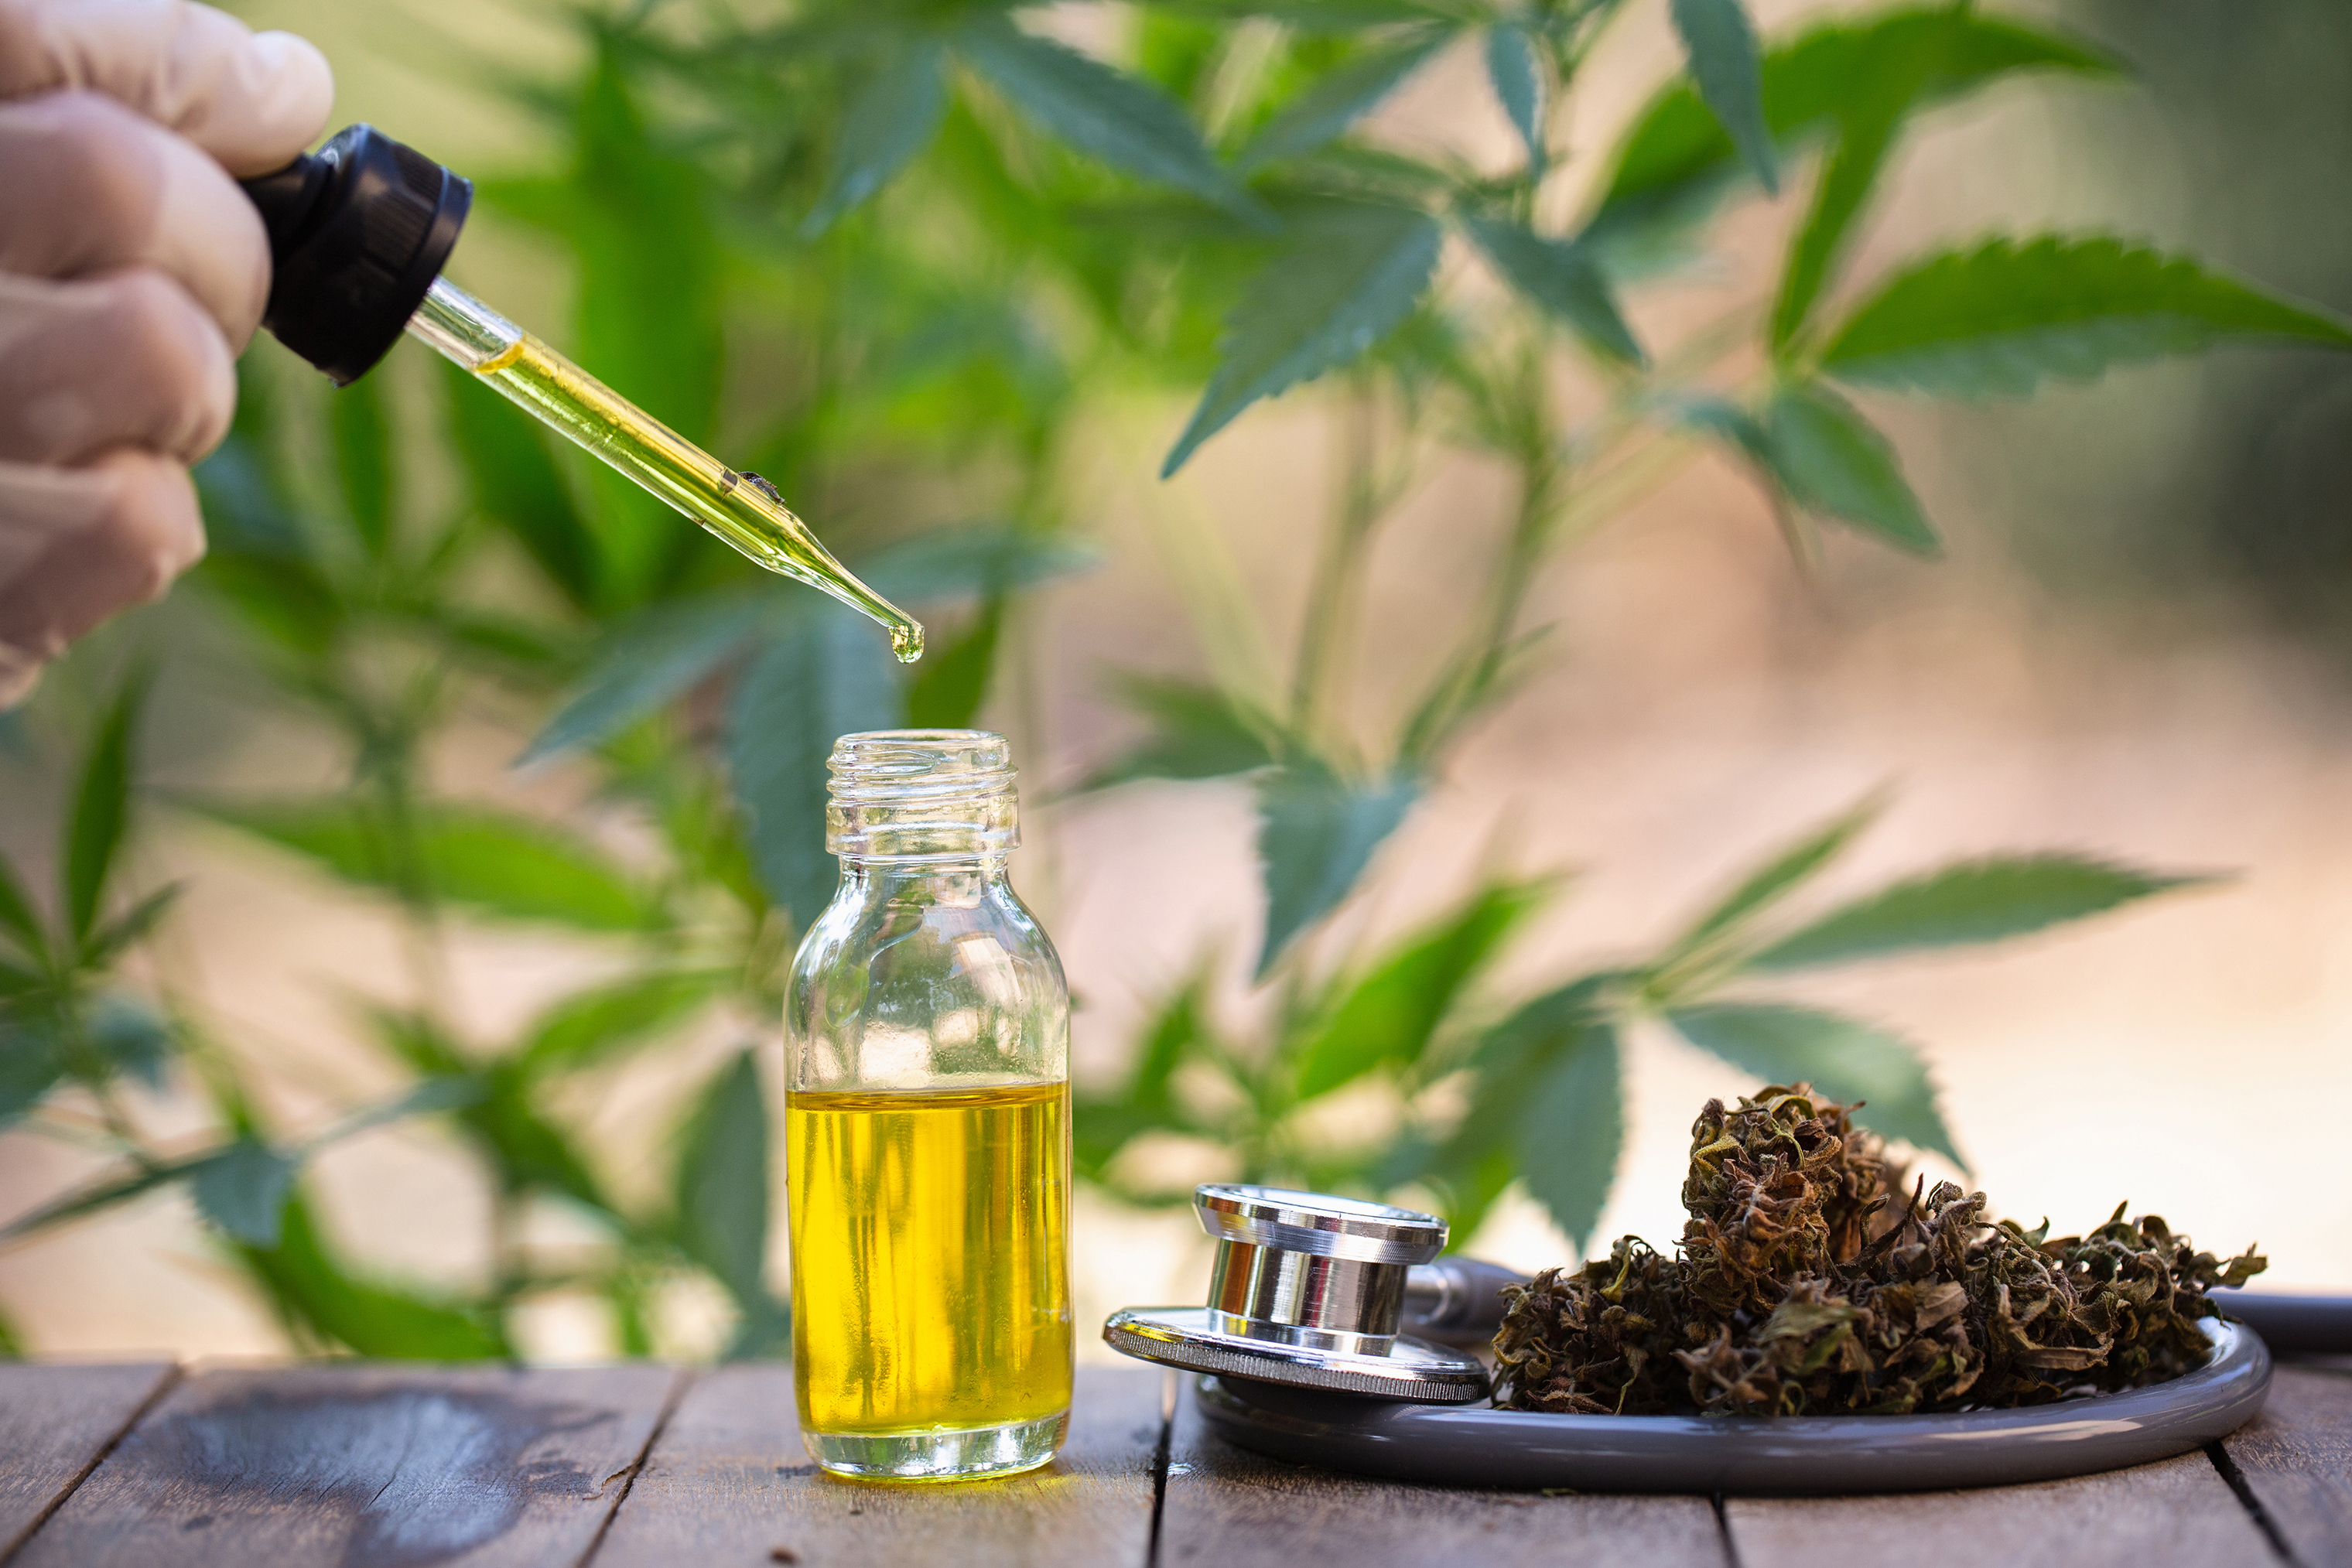 How Much Should You Expect To Pay For Cbd Oil - Cbd|Oil|Cannabidiol|Products|View|Abstract|Effects|Hemp|Cannabis|Product|Thc|Pain|People|Health|Body|Plant|Cannabinoids|Medications|Oils|Drug|Benefits|System|Study|Marijuana|Anxiety|Side|Research|Effect|Liver|Quality|Treatment|Studies|Epilepsy|Symptoms|Gummies|Compounds|Dose|Time|Inflammation|Bottle|Cbd Oil|View Abstract|Side Effects|Cbd Products|Endocannabinoid System|Multiple Sclerosis|Cbd Oils|Cbd Gummies|Cannabis Plant|Hemp Oil|Cbd Product|Hemp Plant|United States|Cytochrome P450|Many People|Chronic Pain|Nuleaf Naturals|Royal Cbd|Full-Spectrum Cbd Oil|Drug Administration|Cbd Oil Products|Medical Marijuana|Drug Test|Heavy Metals|Clinical Trial|Clinical Trials|Cbd Oil Side|Rating Highlights|Wide Variety|Animal Studies